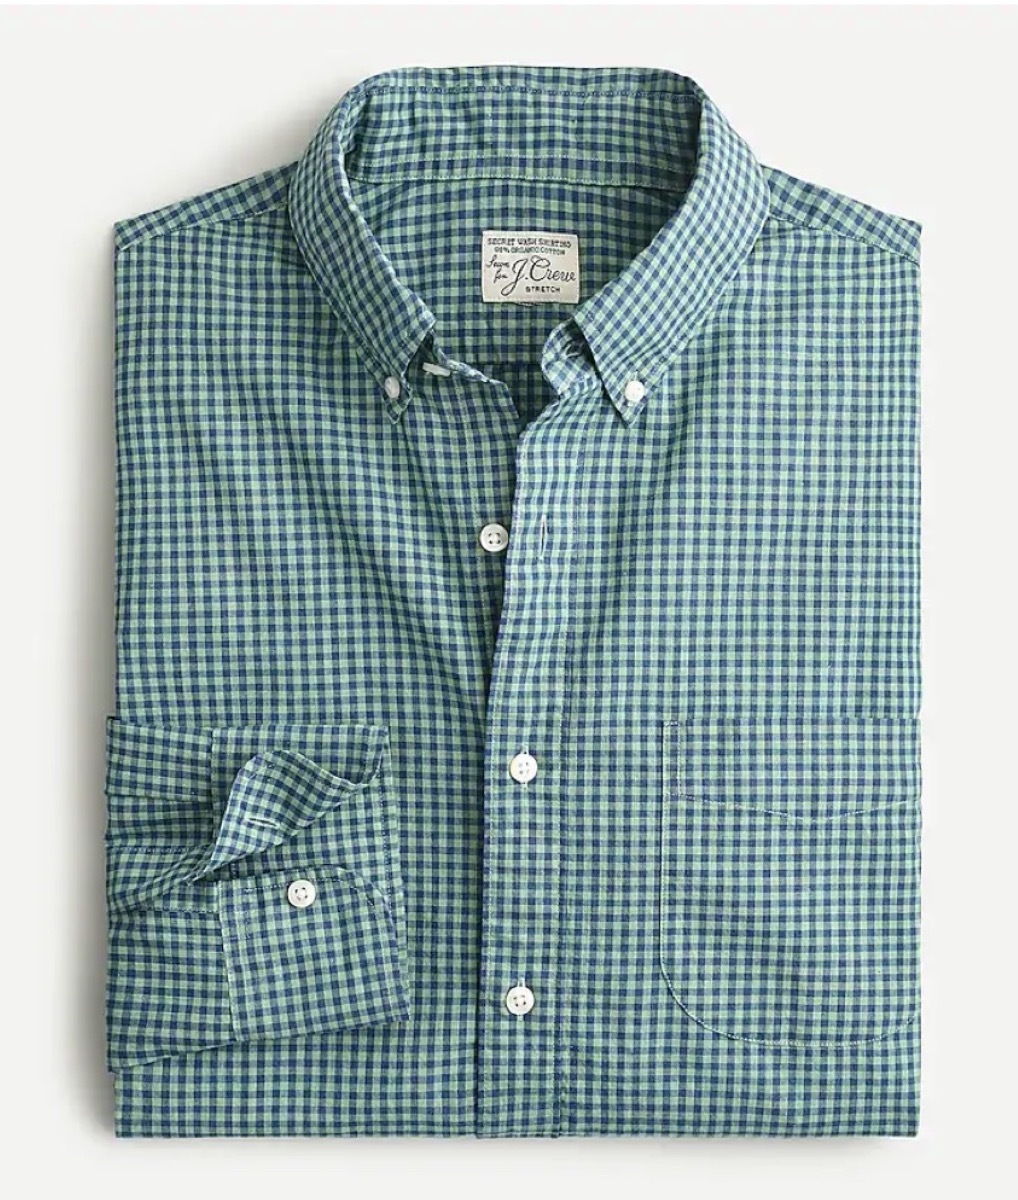 green and white gingham button down shirt